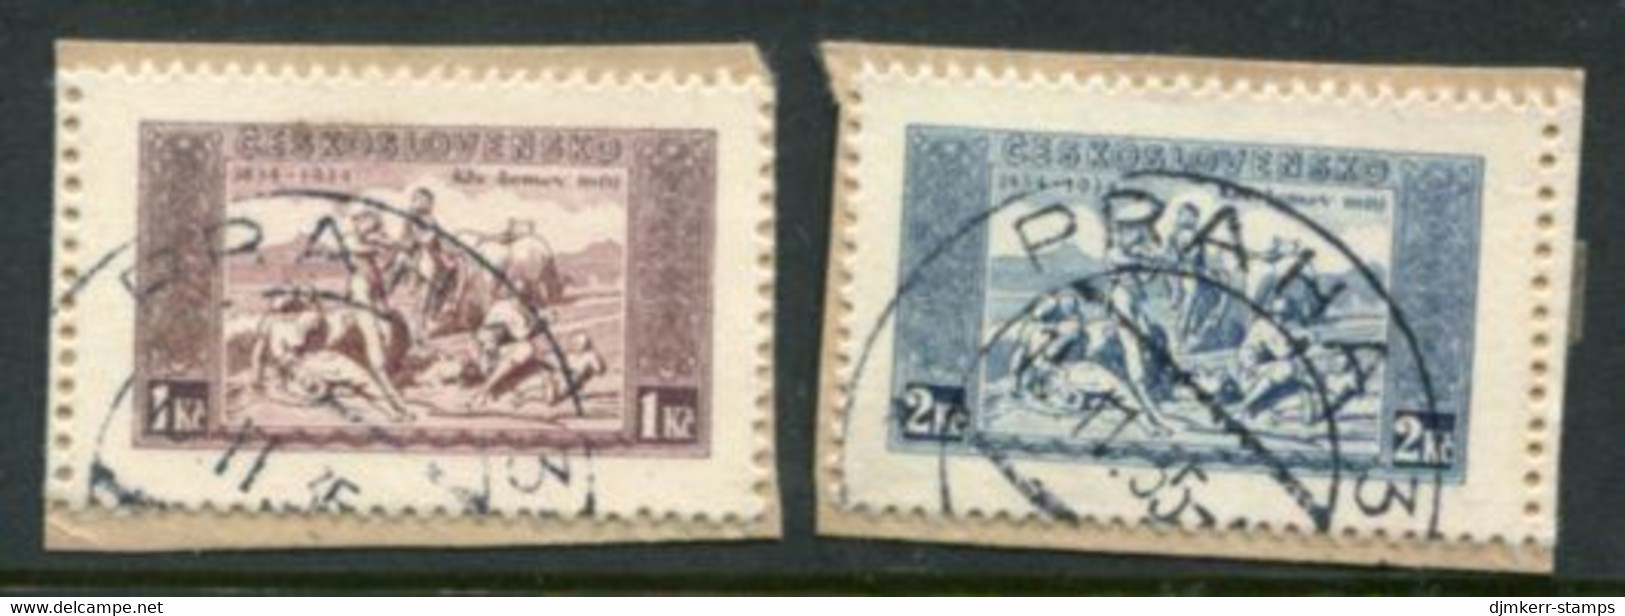 CZECHOSLOVAKIA 1934 National Anthem Centenary 1 Kc, 2 Kr.. On Carton Paper Used On Pieces. .  Michel 330-31x - Usados